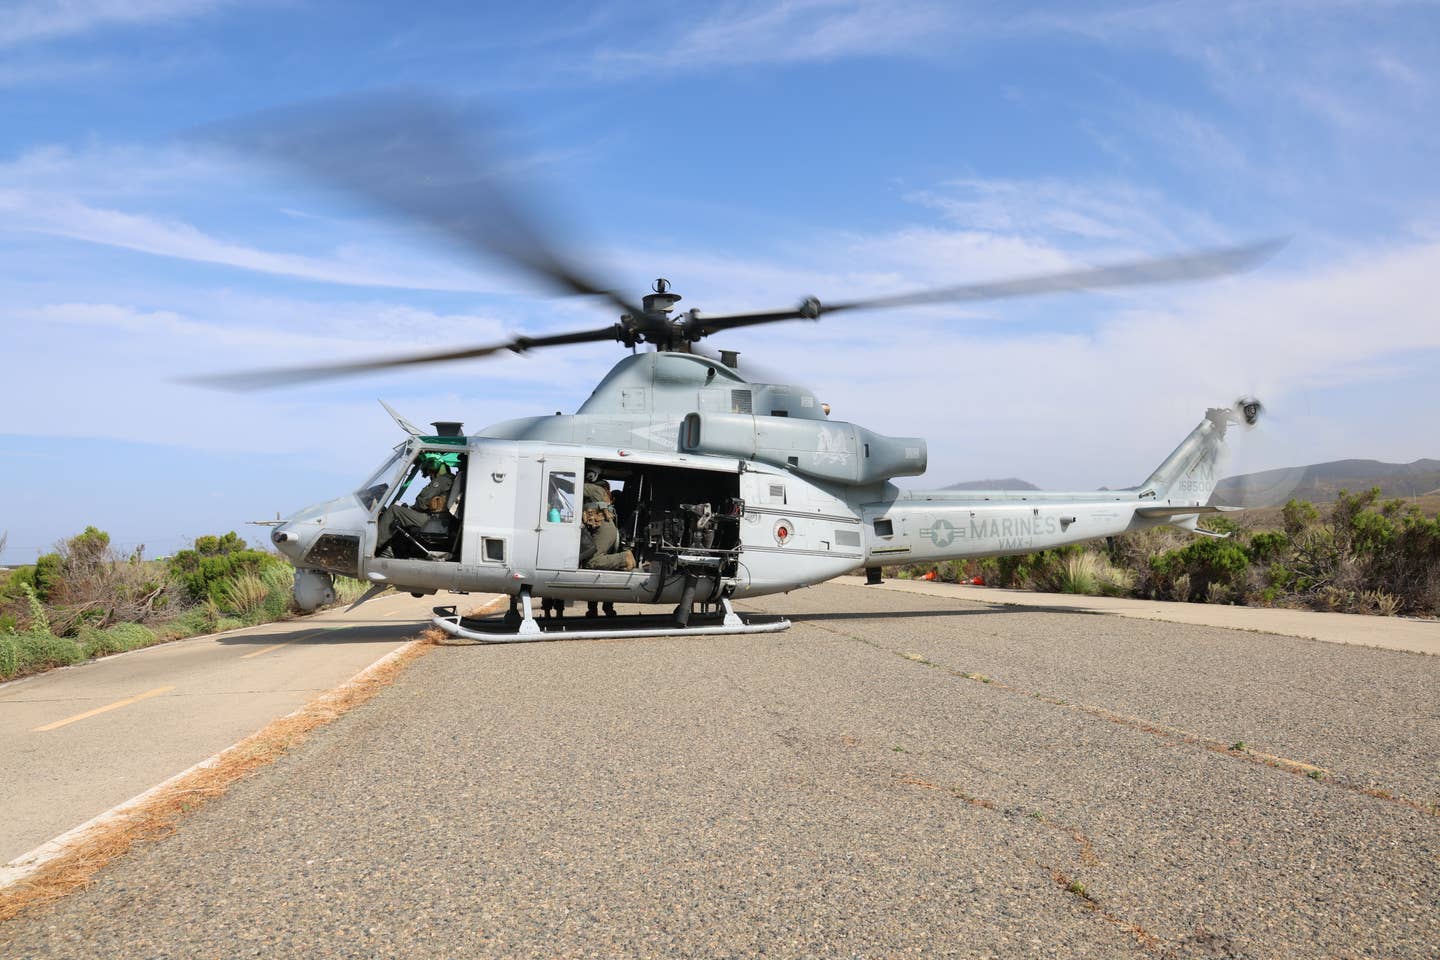 A VMX-1 UH-1Y sits on the roadway during the exercise. (James Deboer)